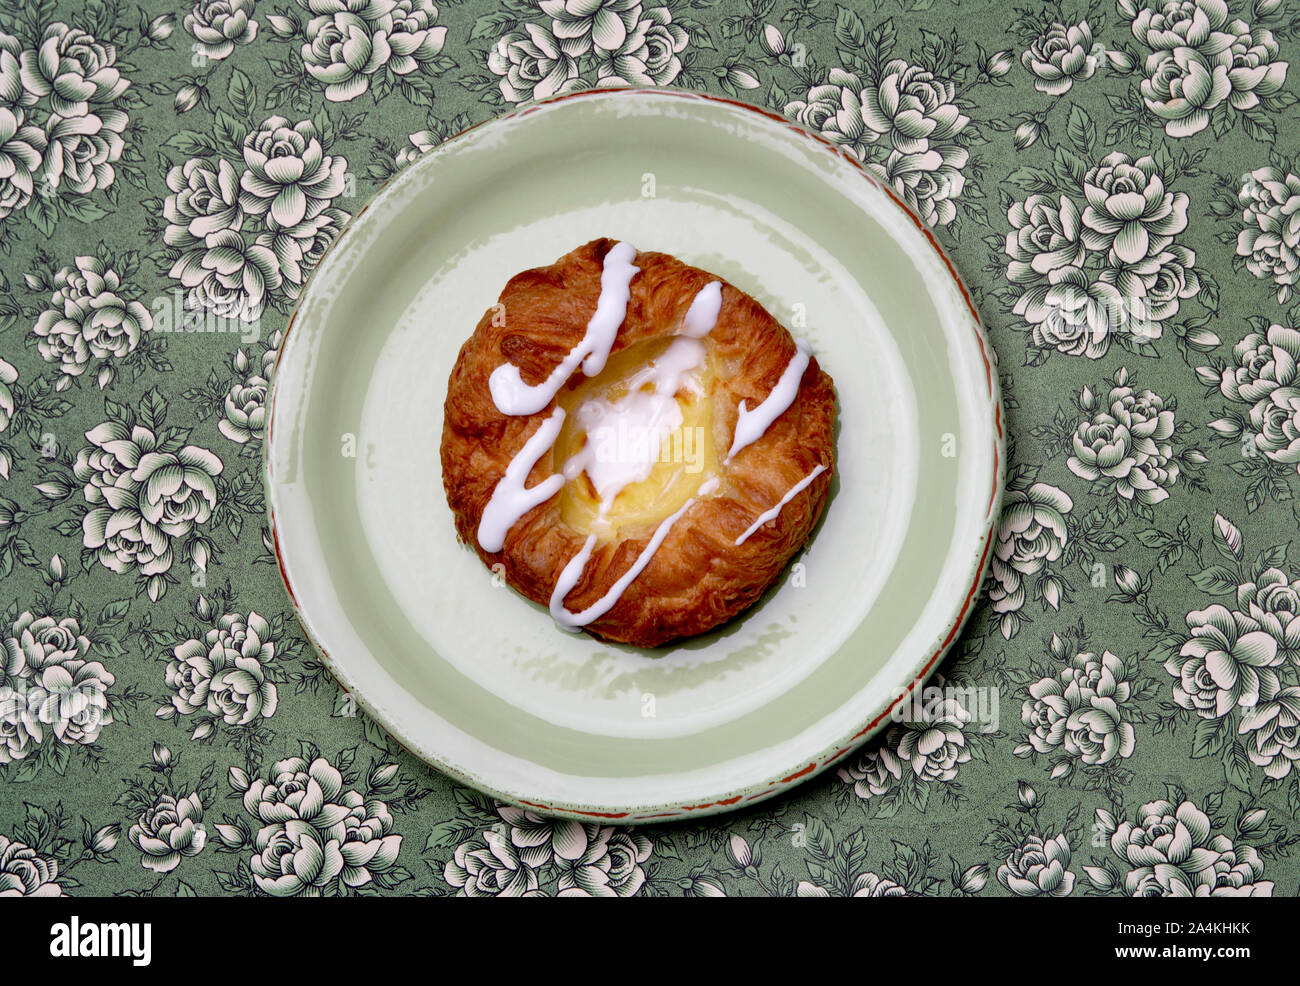 Fattening danish pastry with a lot of calories Stock Photo